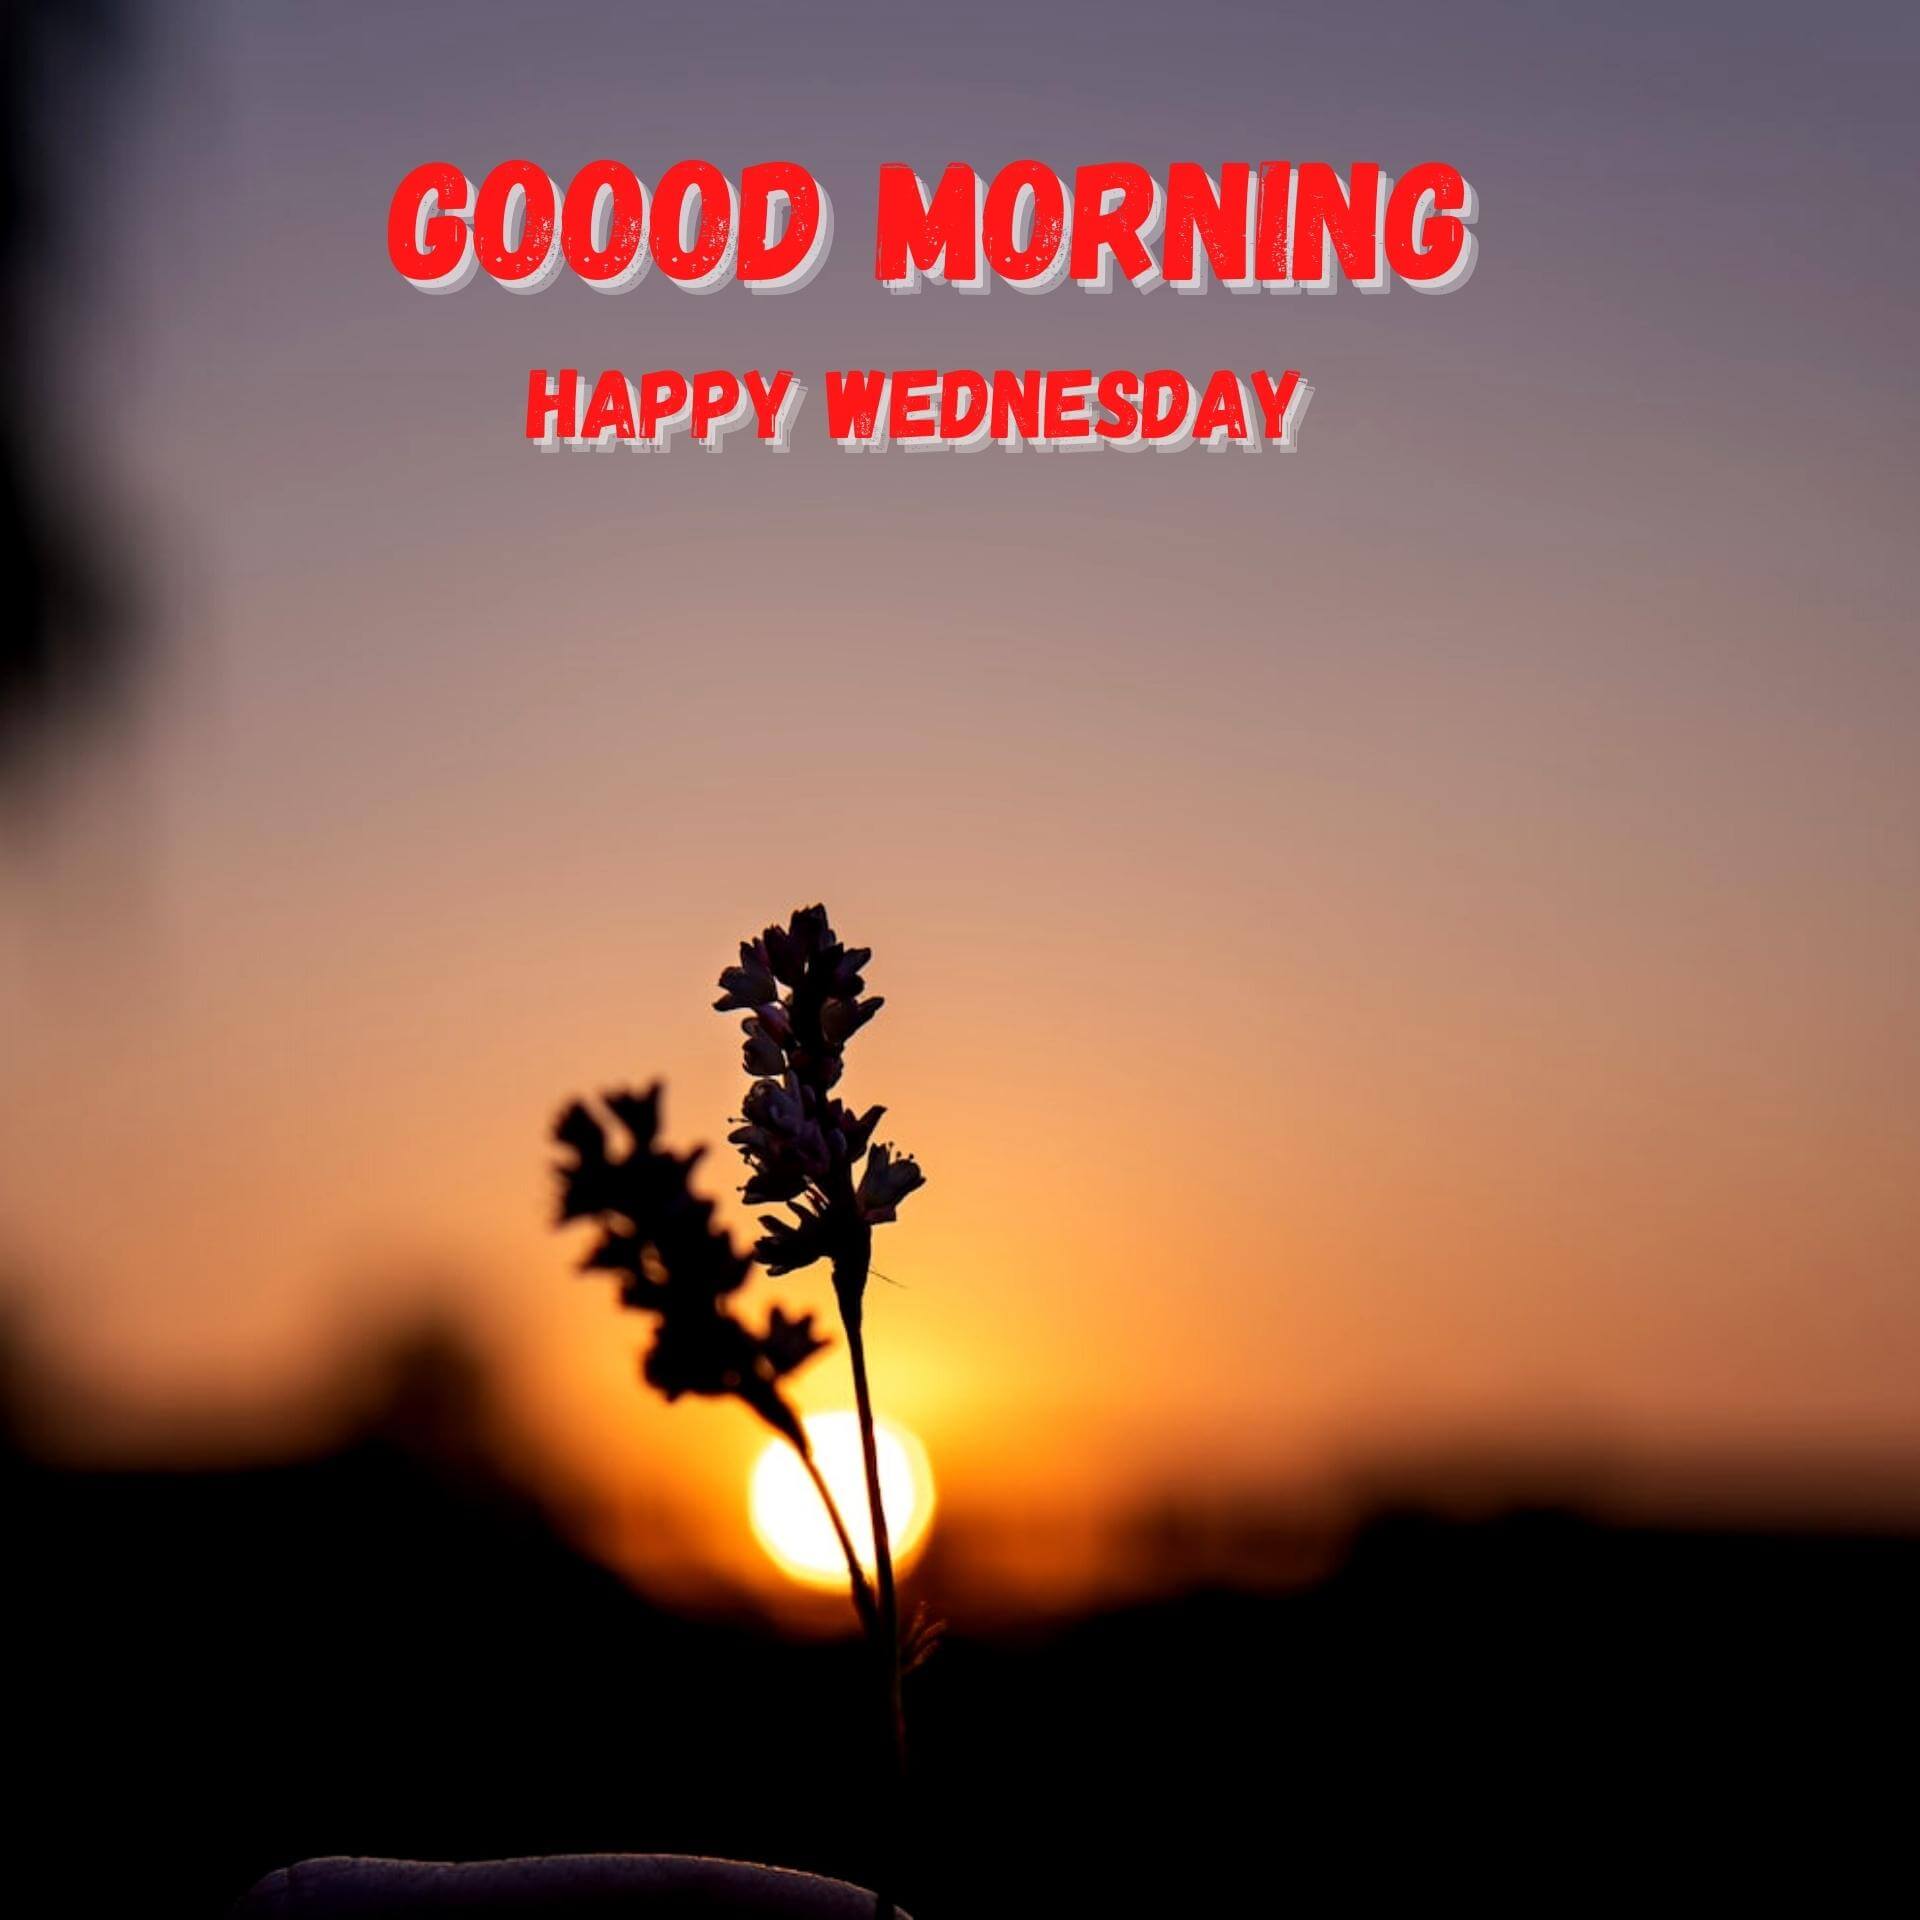 Wednesday good morning pics Wallpaper With Sunrise